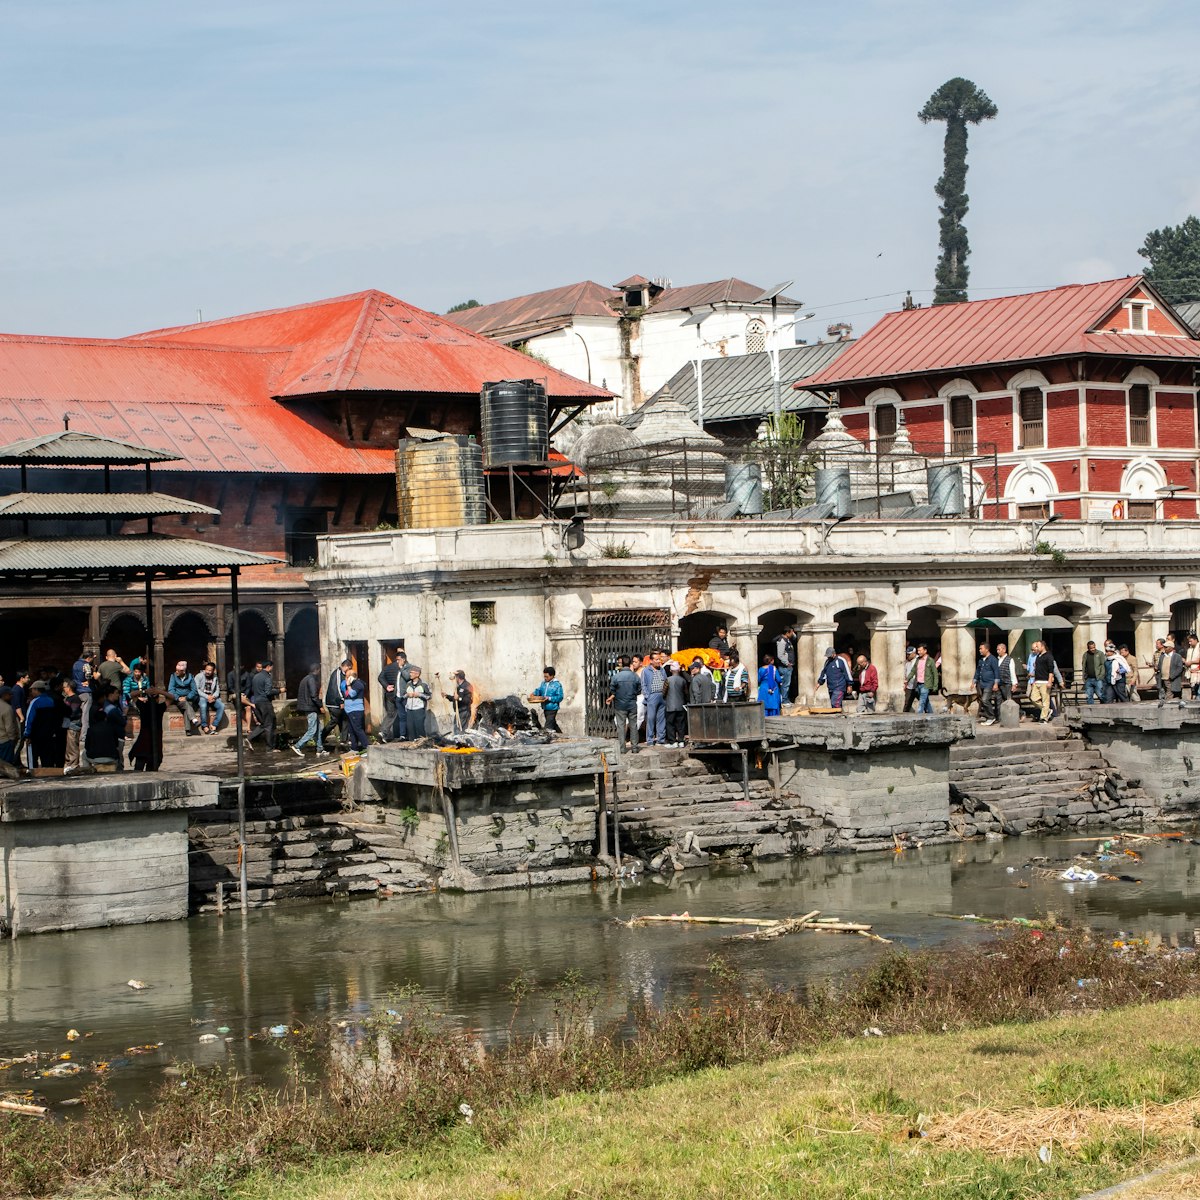 Platforms for cremations are lined up along the Bagmati River in Pashupatinah, Kathmandu, Nepal.